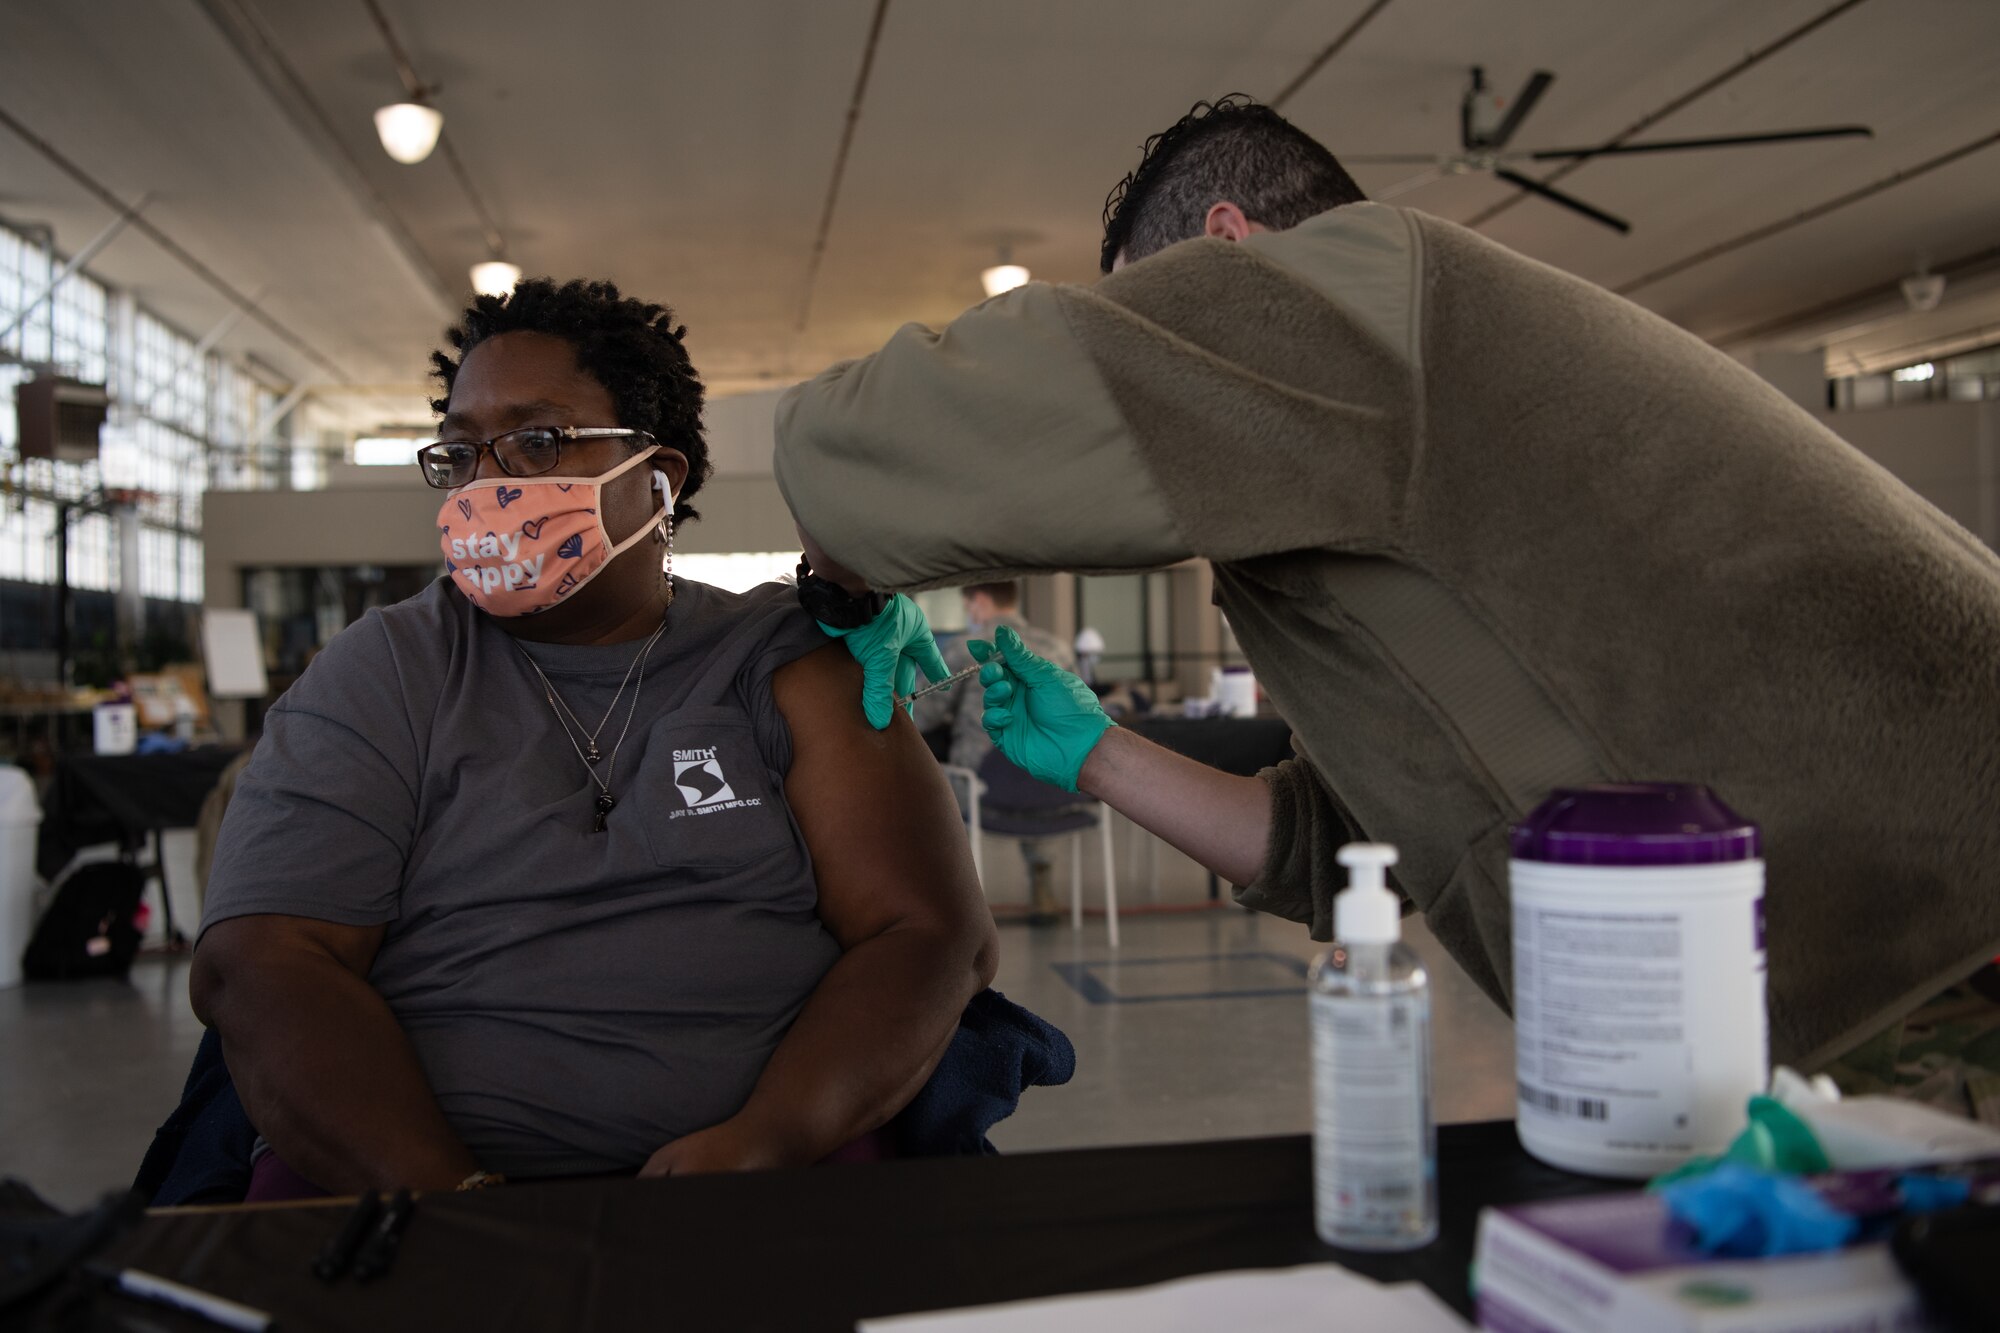 Tech. Sgt. Brandon Avila, 42nd Medical Group Flight Medicine noncommissioned officer in charge, administers the COVID-19 vaccine to Margo Strong, a janitor at the 42nd MDG Jan. 16, 2020, at the off-site clinic in the Honor Guard hangar on Maxwell Air Force Base, Alabama. Strong was offered the vaccine because her job puts her at a higher risk of exposure to COVID-19.